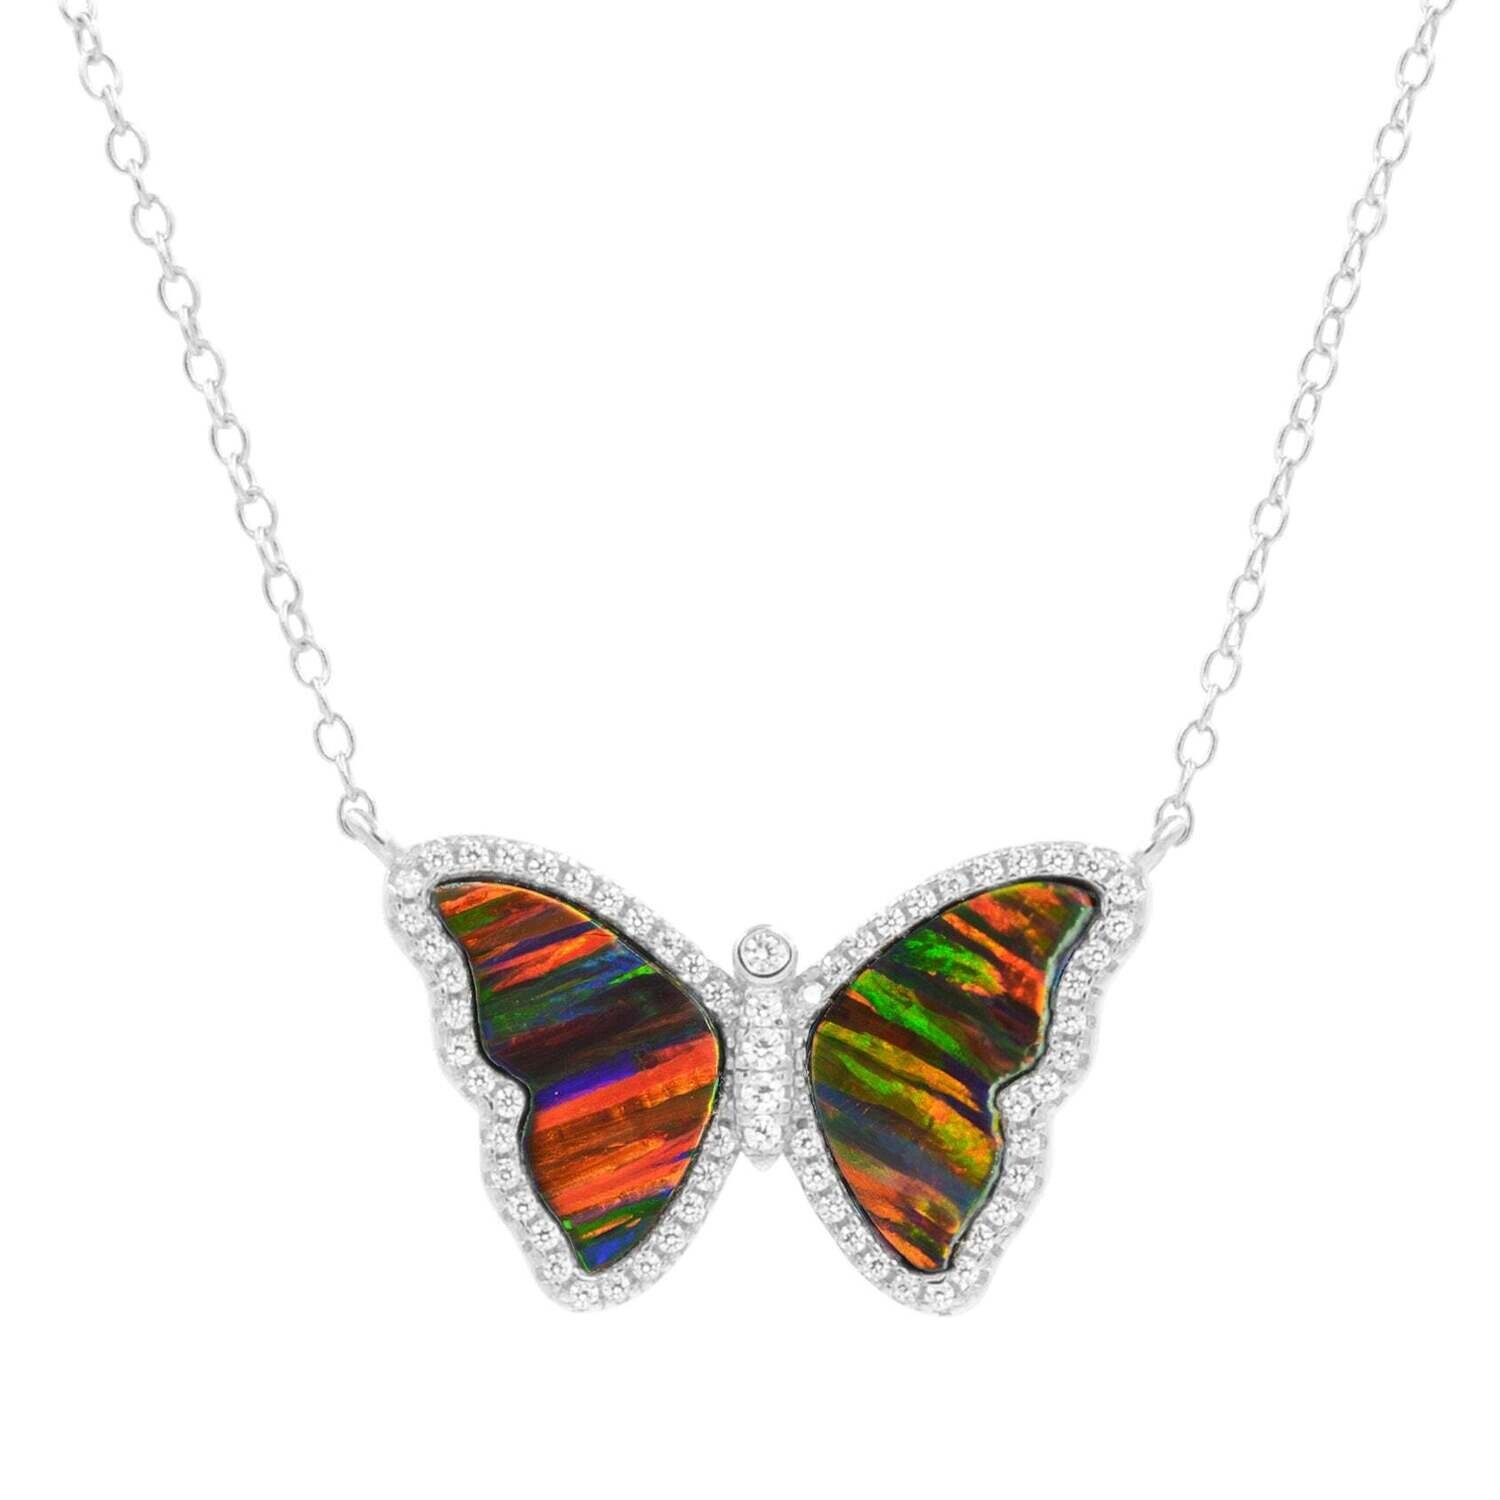 Kamaria Black Opal Butterfly Necklace with Stripes (Silver)